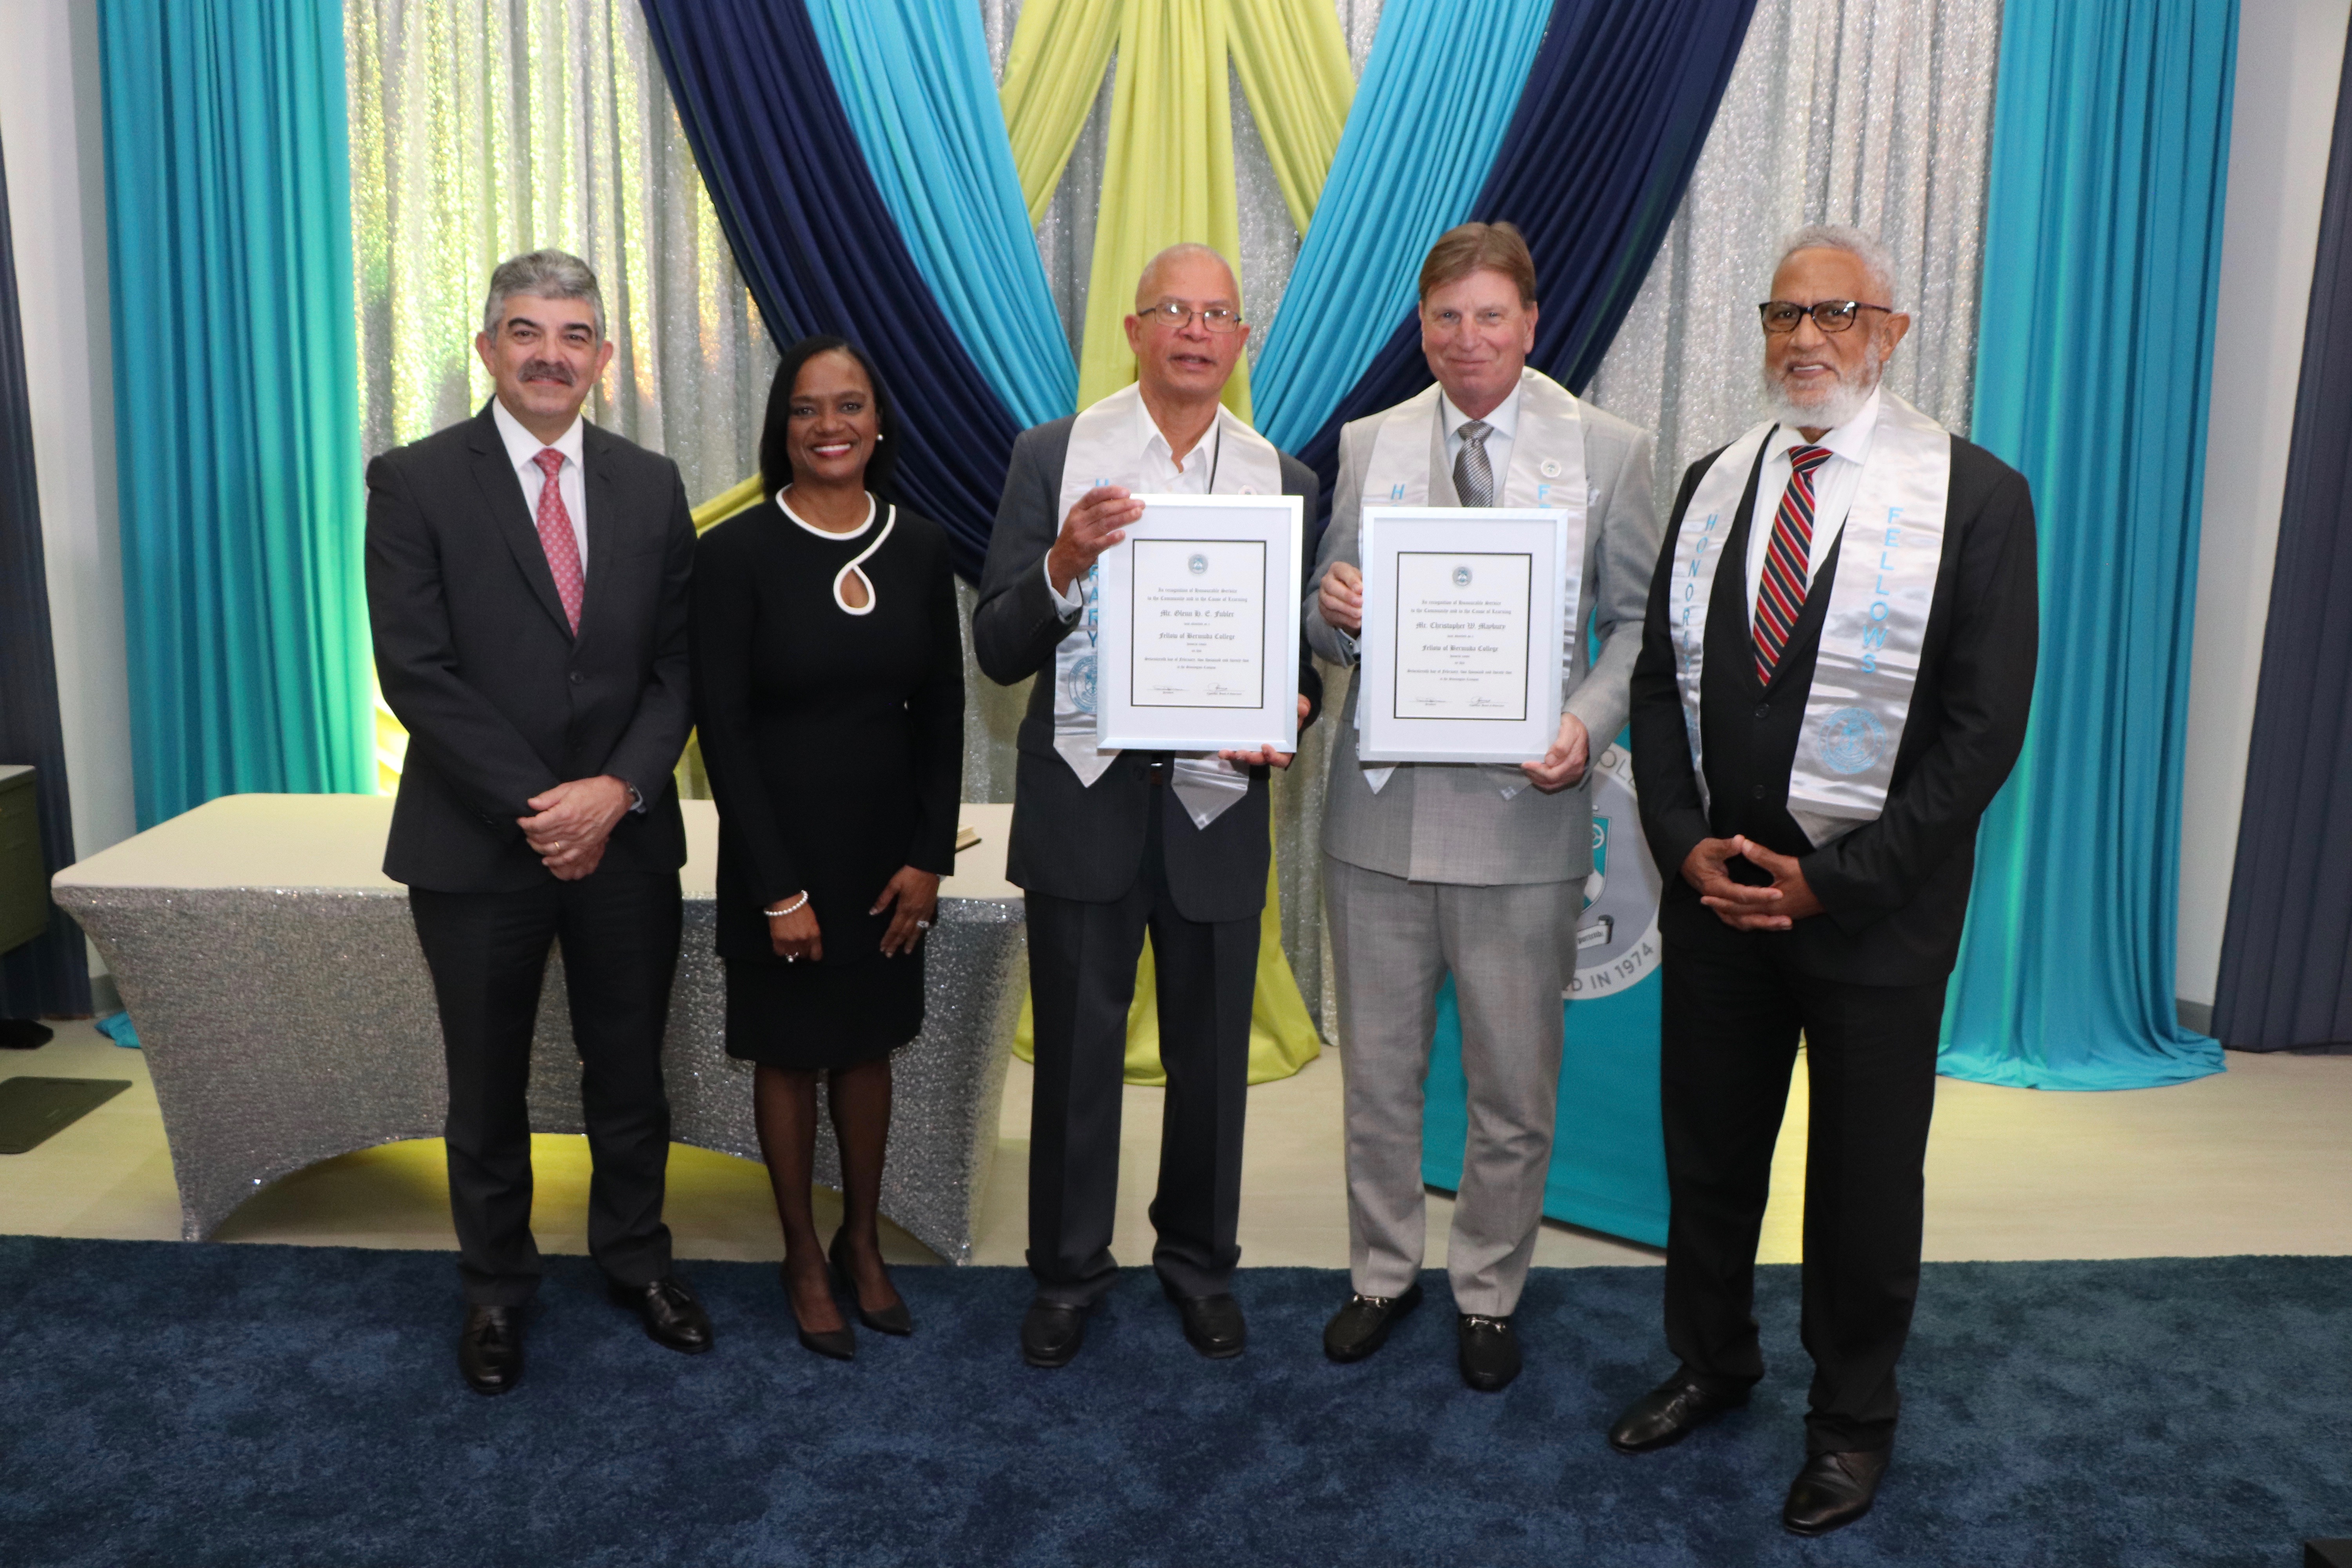 Two Honorary Fellows